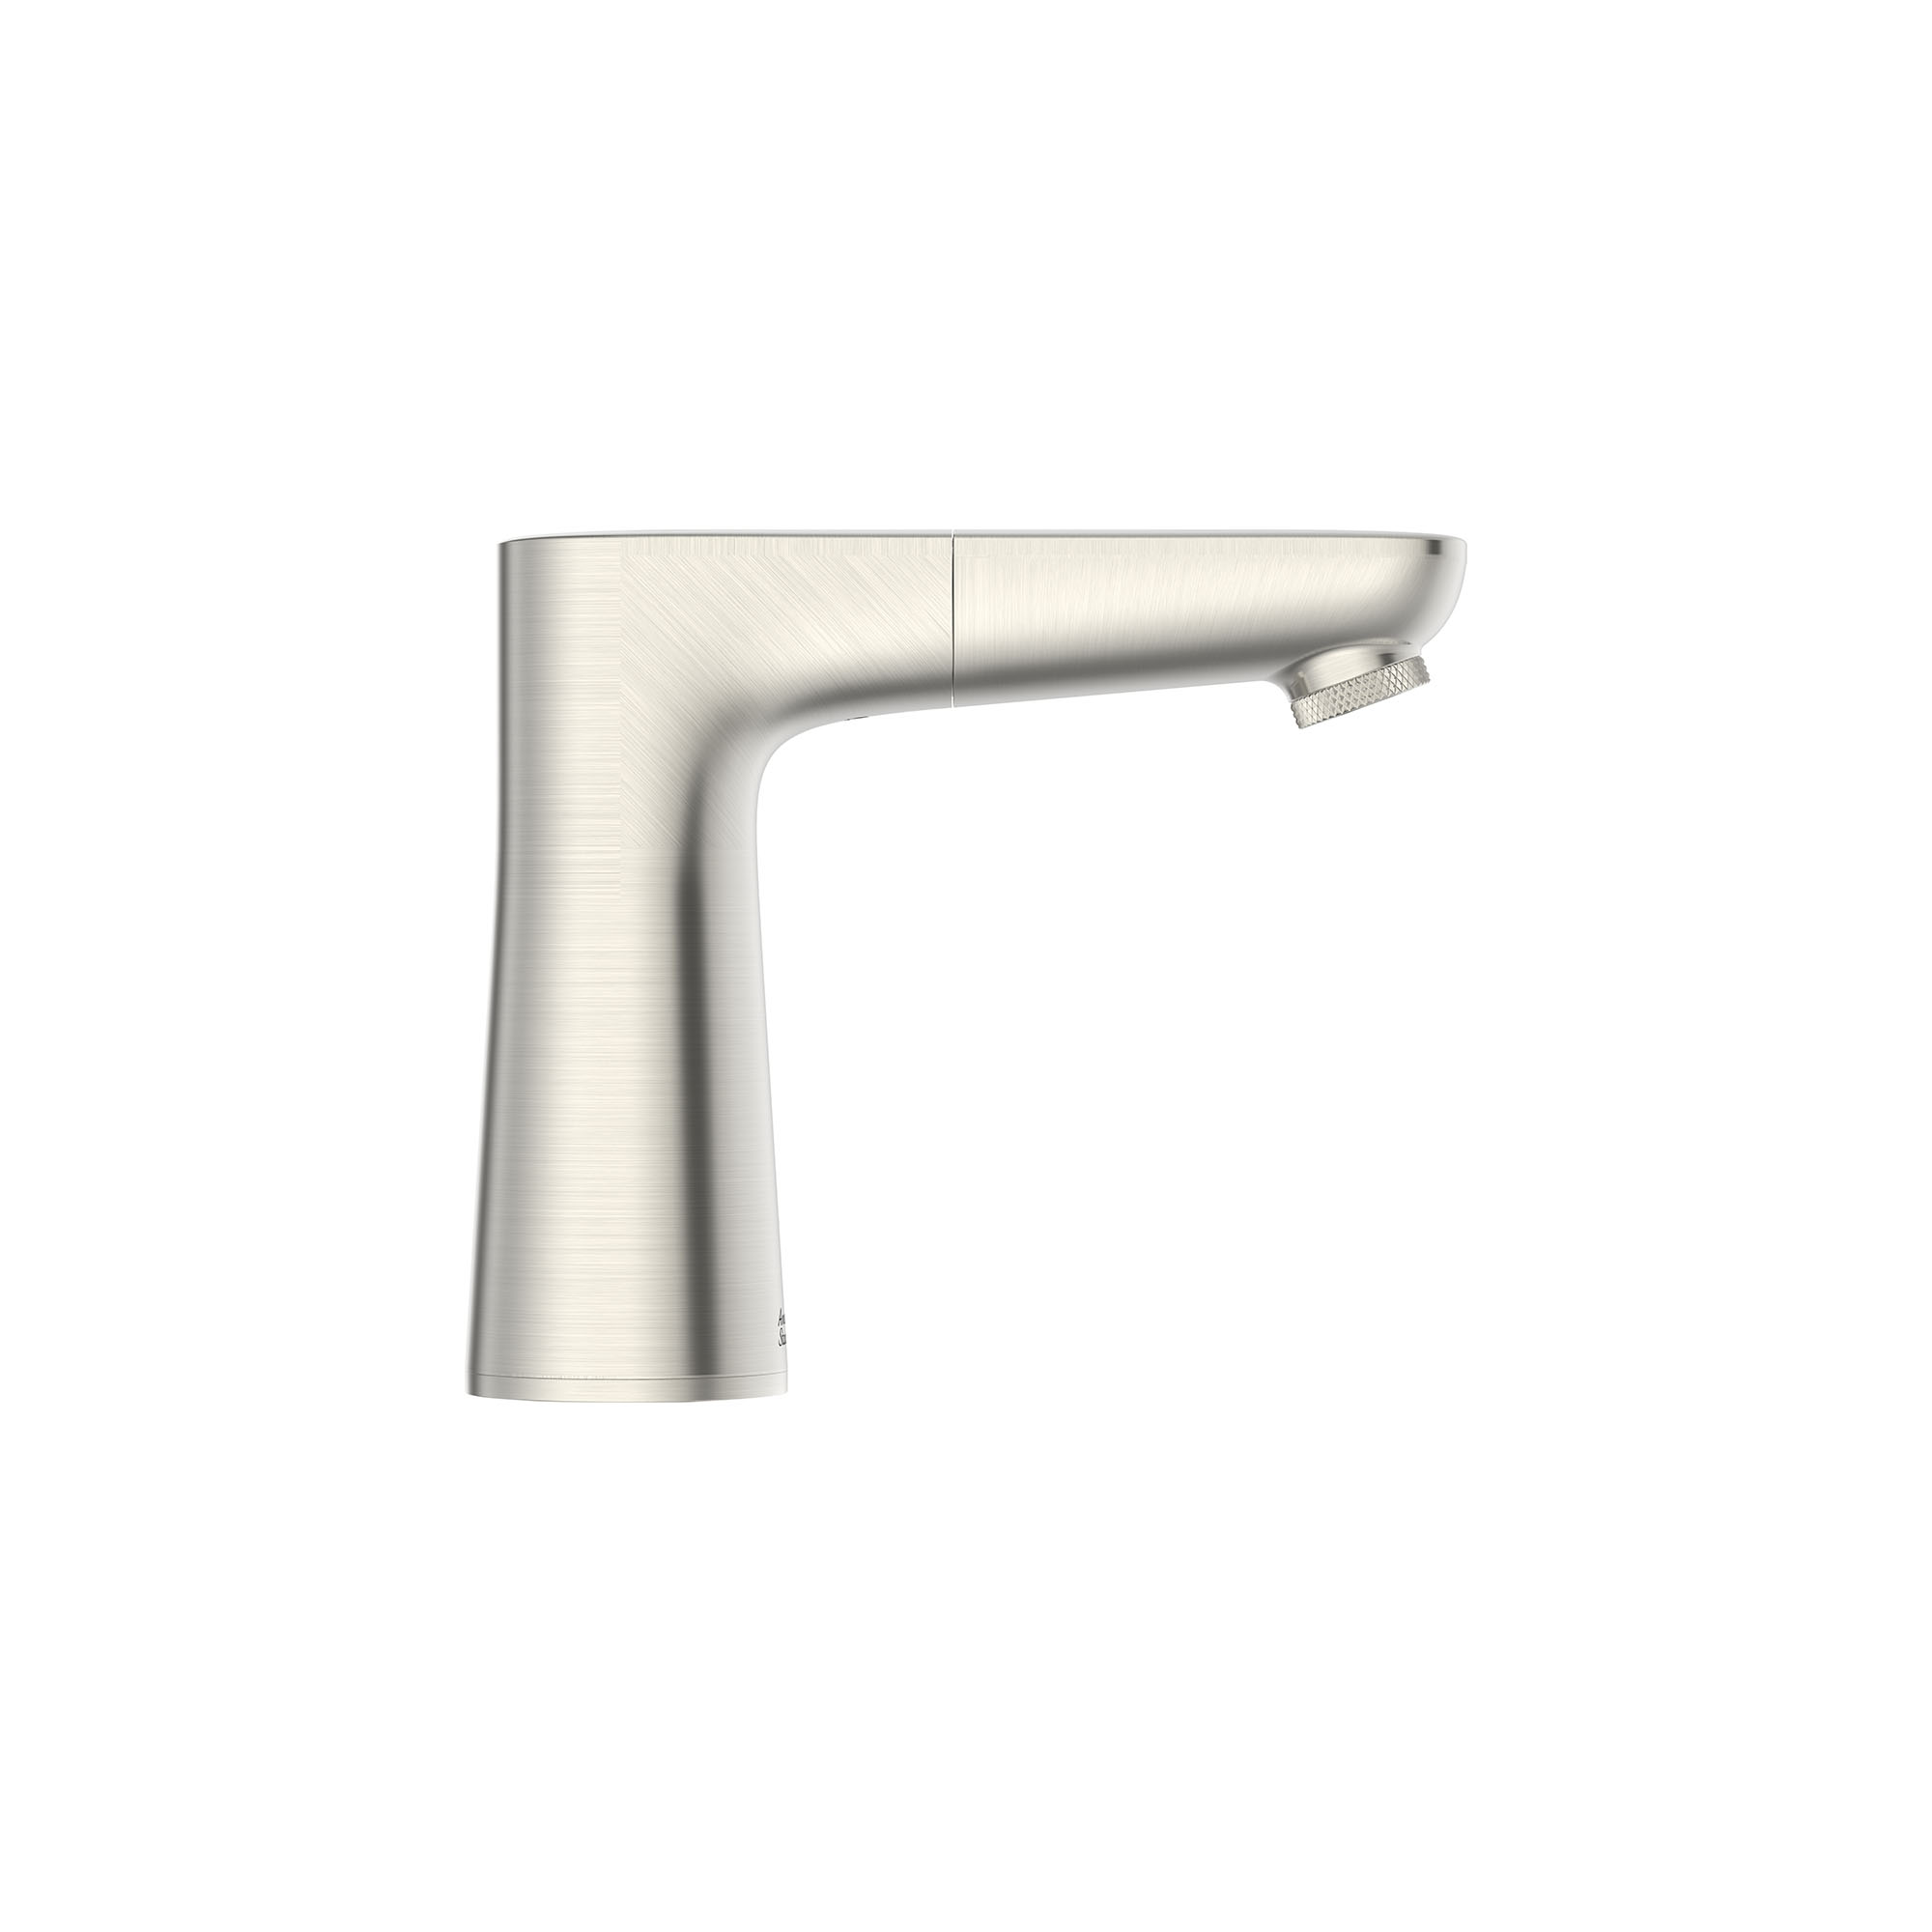 Aspirations™ Single-Handle Pull-Out Bathroom Faucet 1.2 gpm/4.5 L/min With Lever Handle